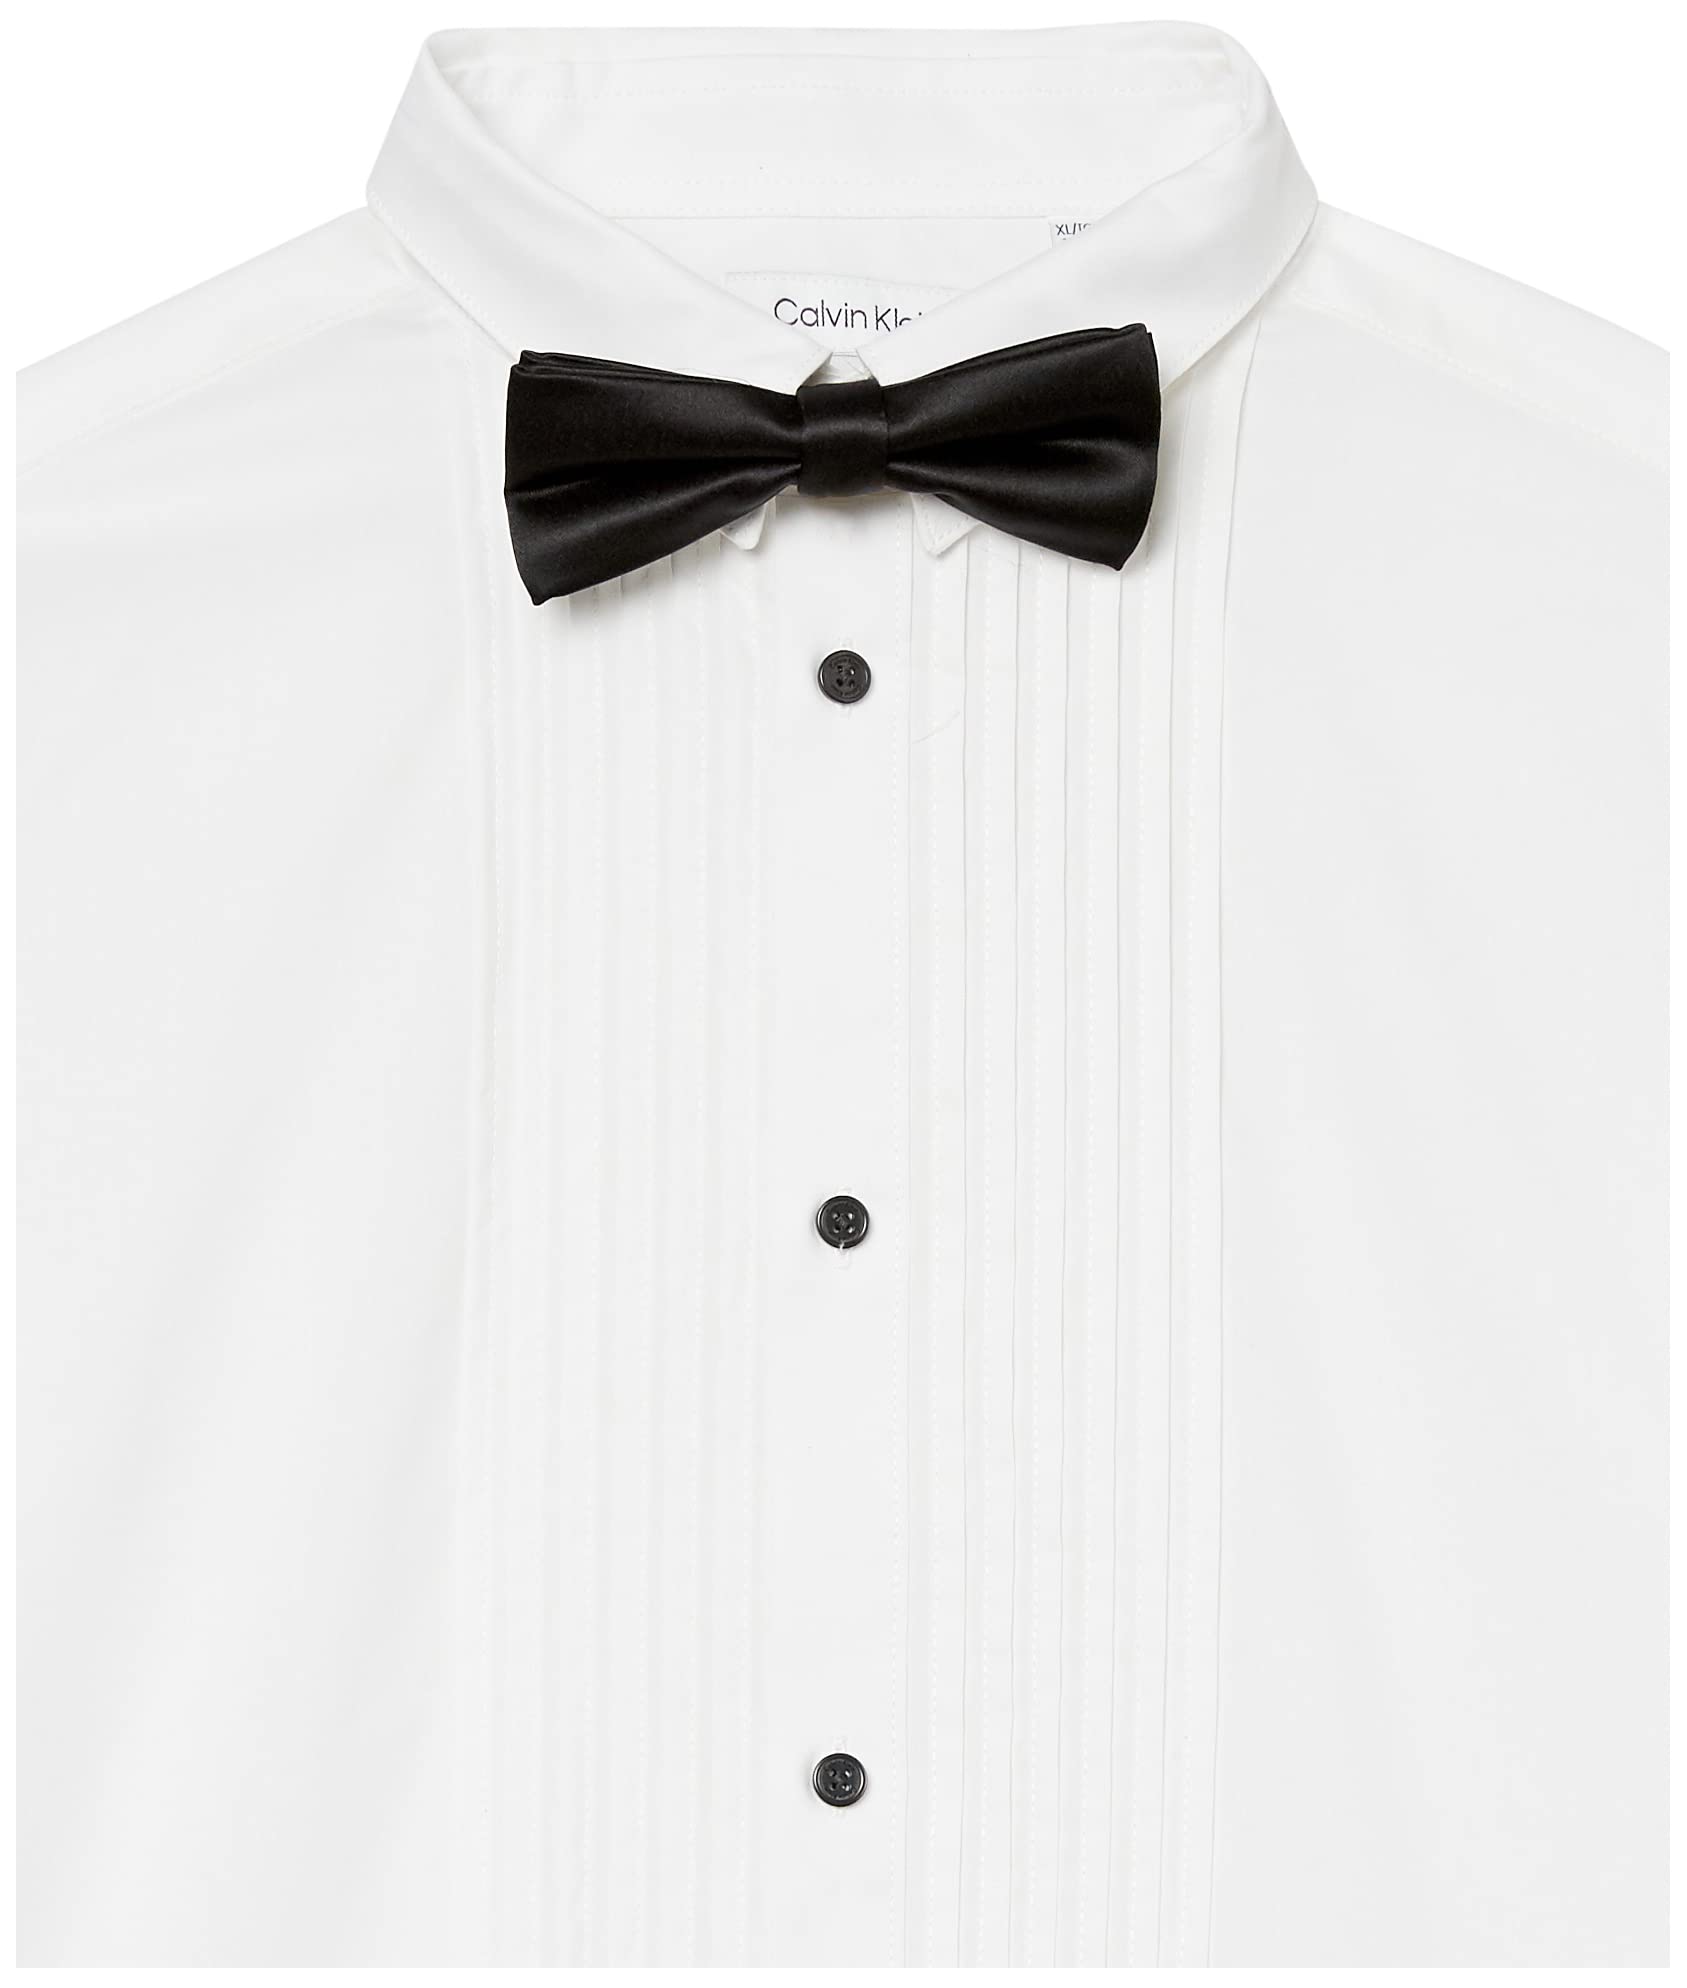 Calvin Klein Boys' Long Sleeve Tuxedo Dress Shirt with Bow Tie, Button-Down Style with Classic Pleated Bib, Matching Hanky